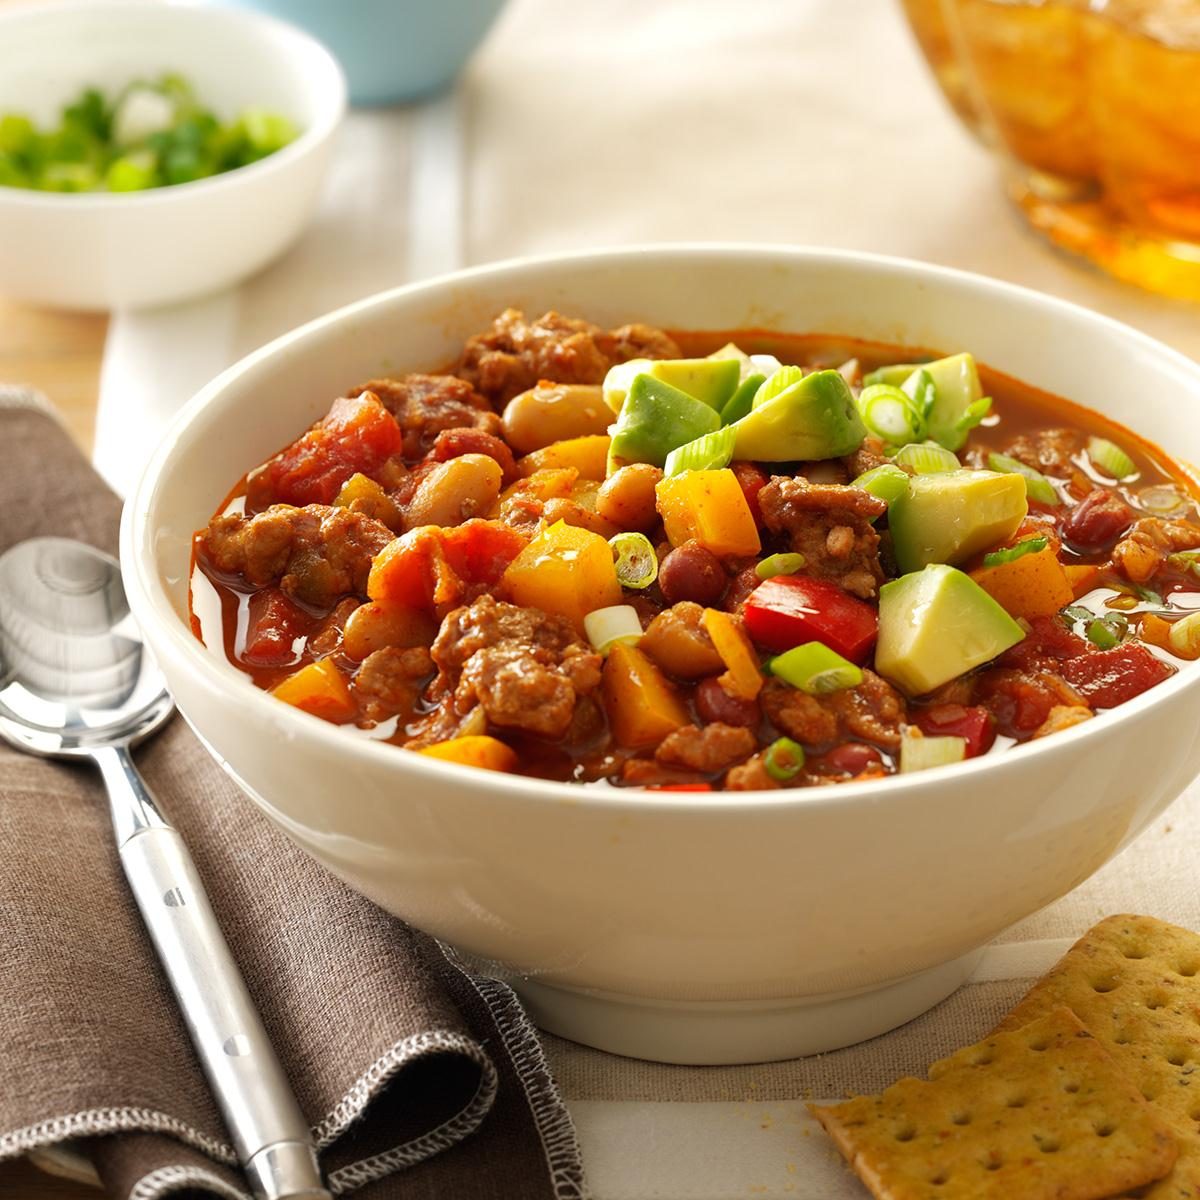 Slow-Cooker Turkey Chili Recipe: How to Make It